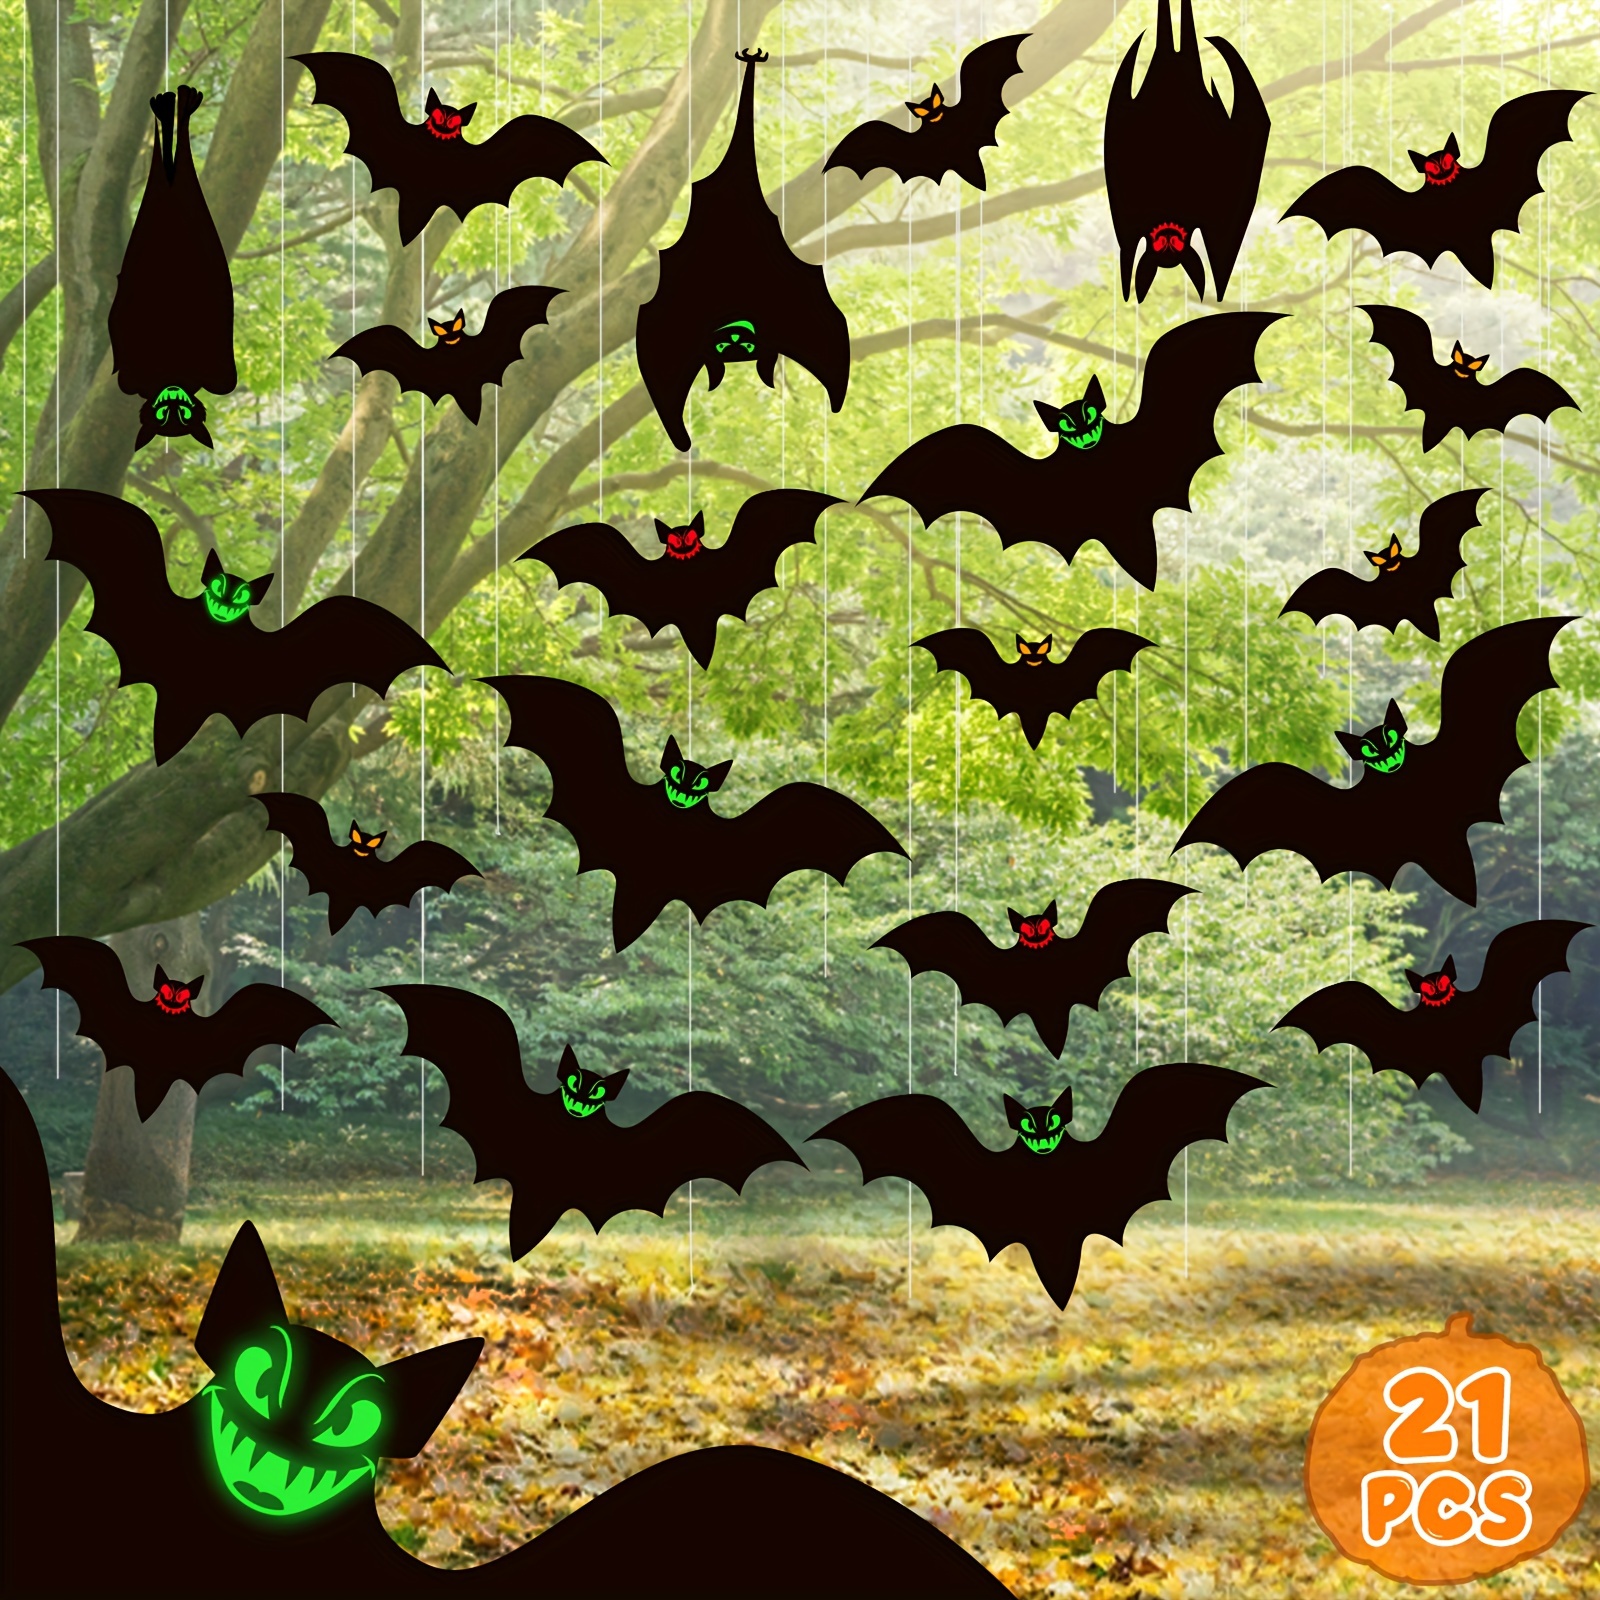 

21pcs Hanging Bats Halloween Decoration Outdoor, Large Flying Bats Outside Halloween Decor With Glowing Eyes, 6 Different Size Black Bats For Trees Porch Yard Lawn- Hanging Halloween Decorations